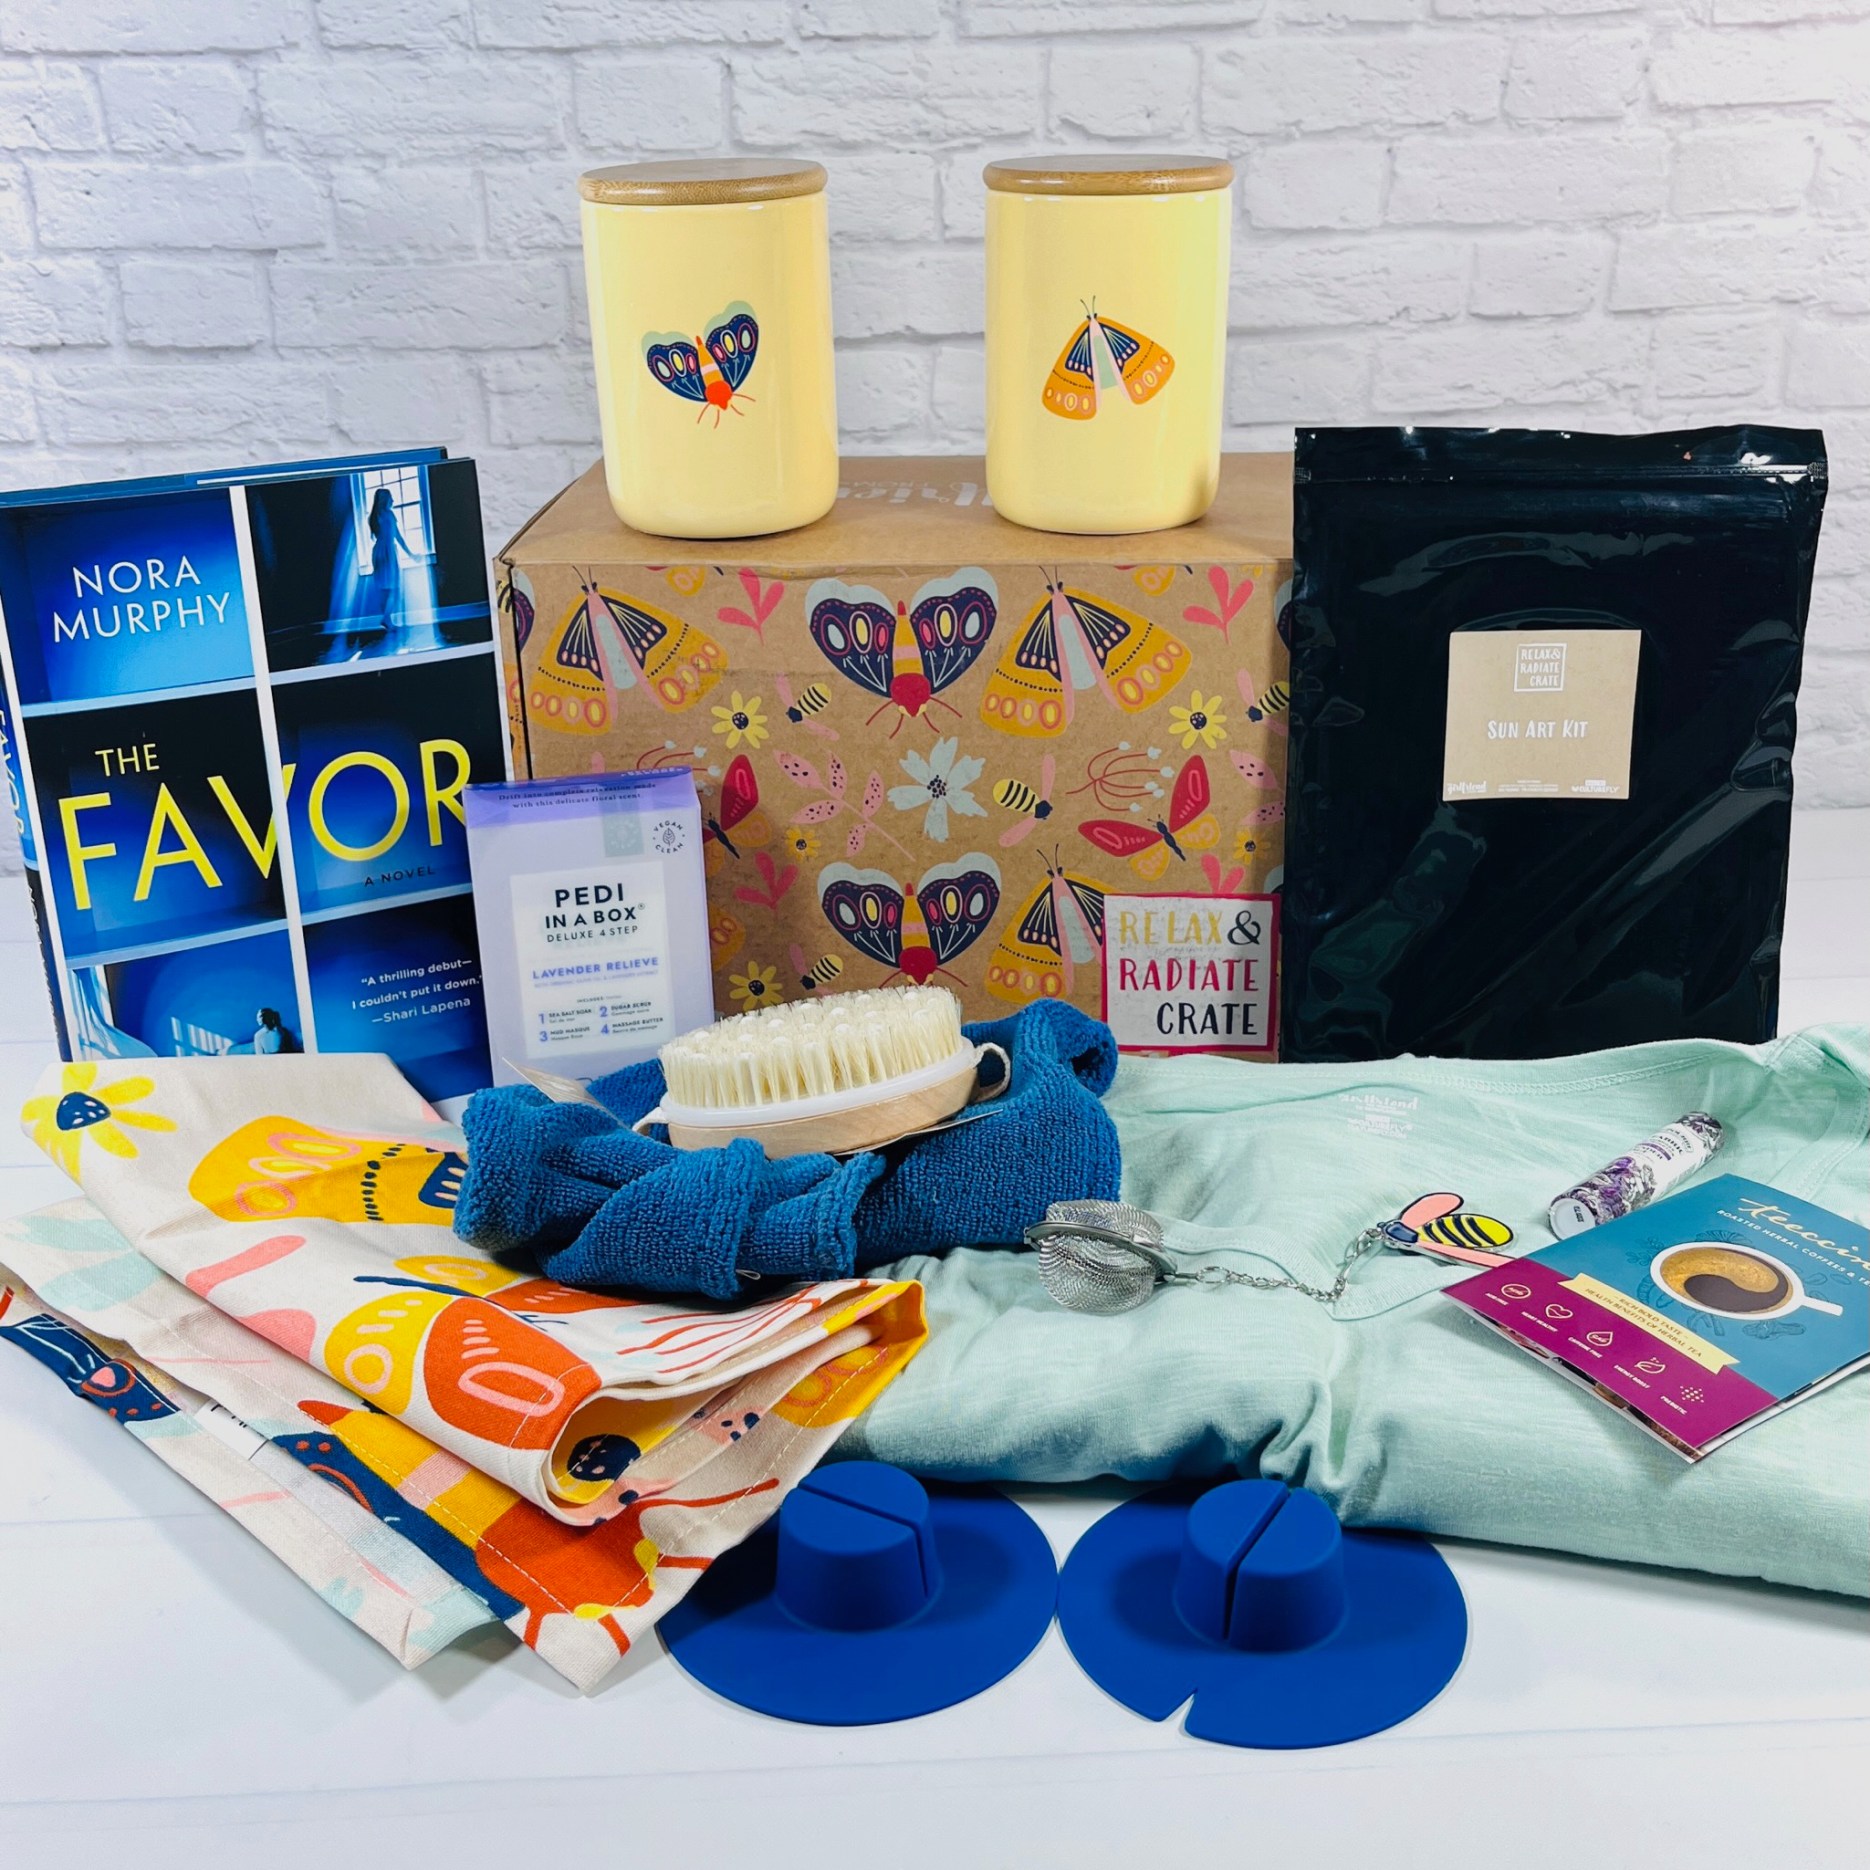 Relax & Radiate Crate Spring 2023 Review Savor & SoakIn! Hello